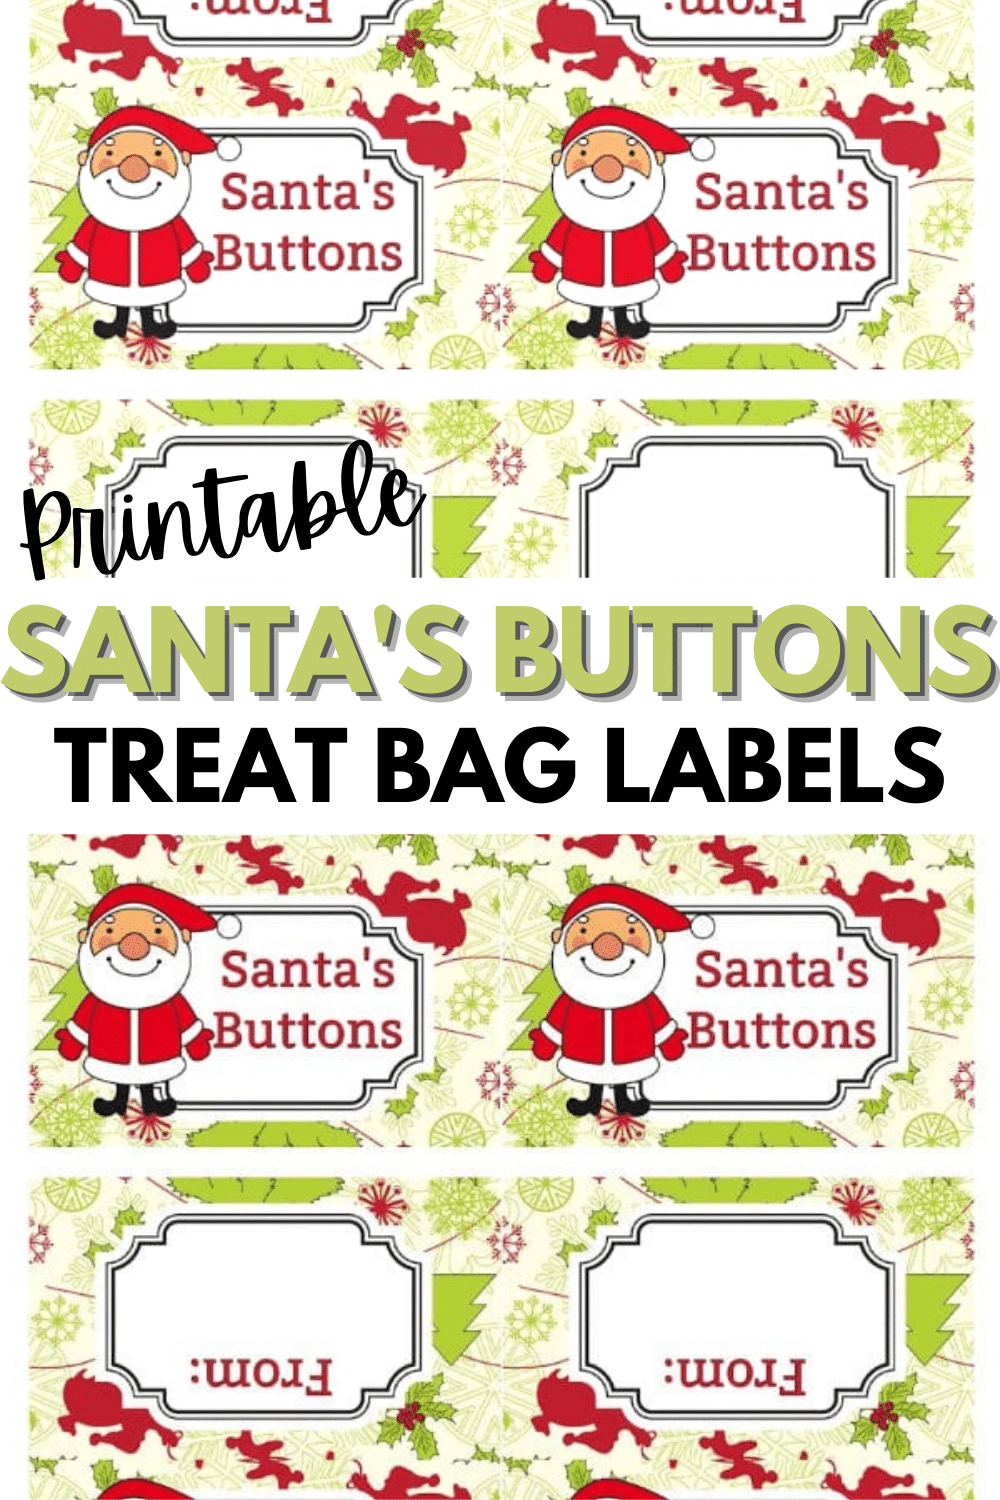 These adorable Santa's Buttons Treat Bags are so easy to make with my printable treat bag toppers. A great gift idea for class parties during the holidays. #treatbags #Christmas #printables via @wondermomwannab